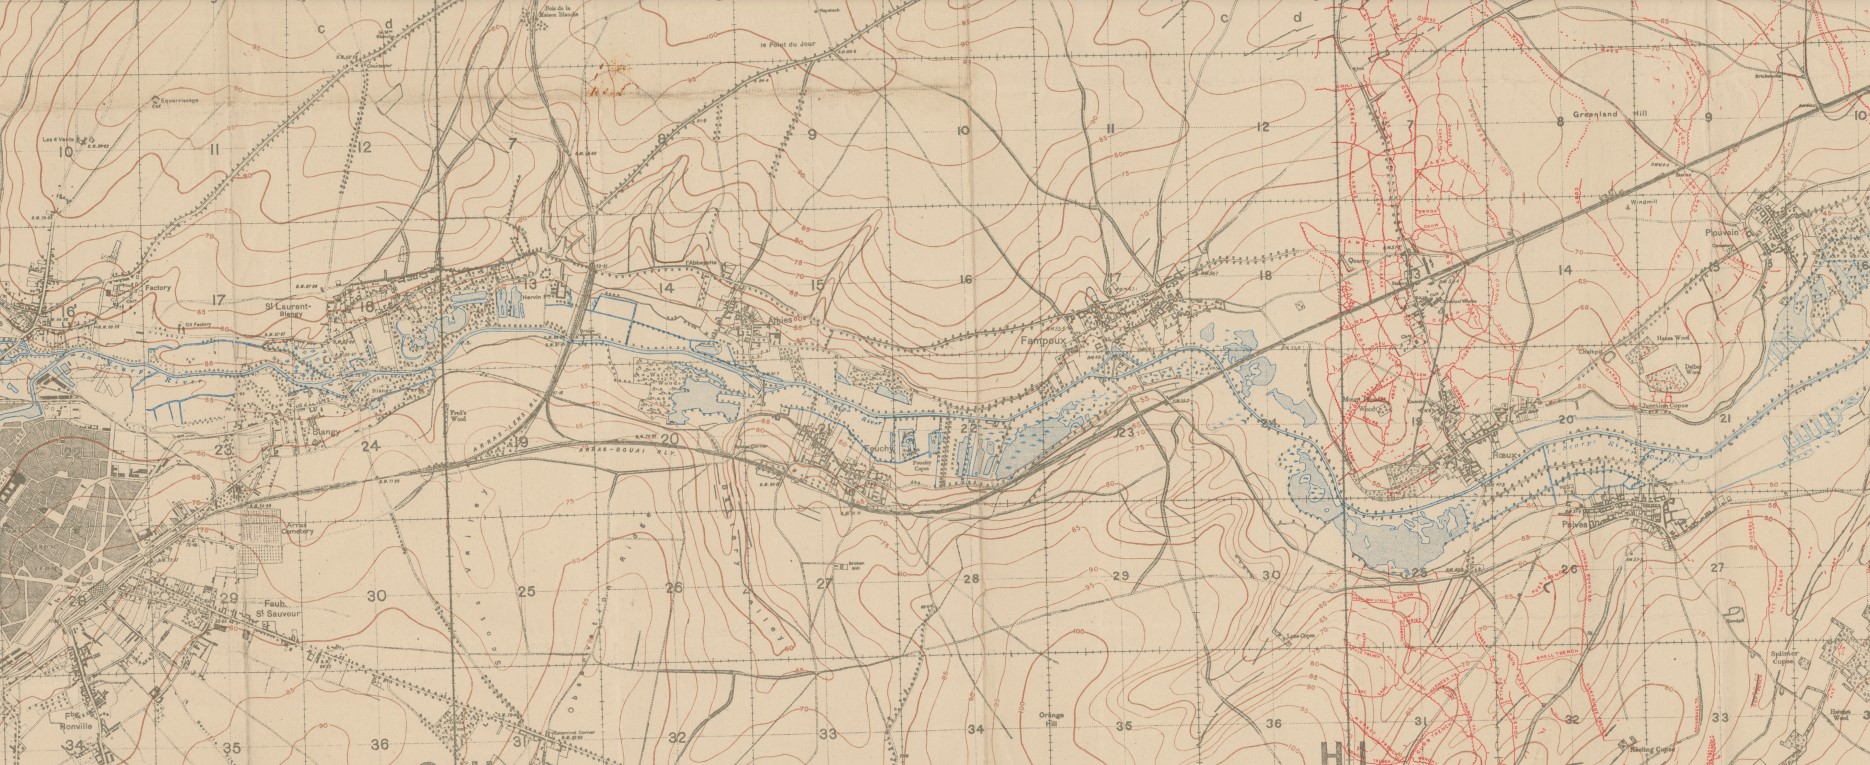 NLS WWI Trench Map Arras 1917 05 17